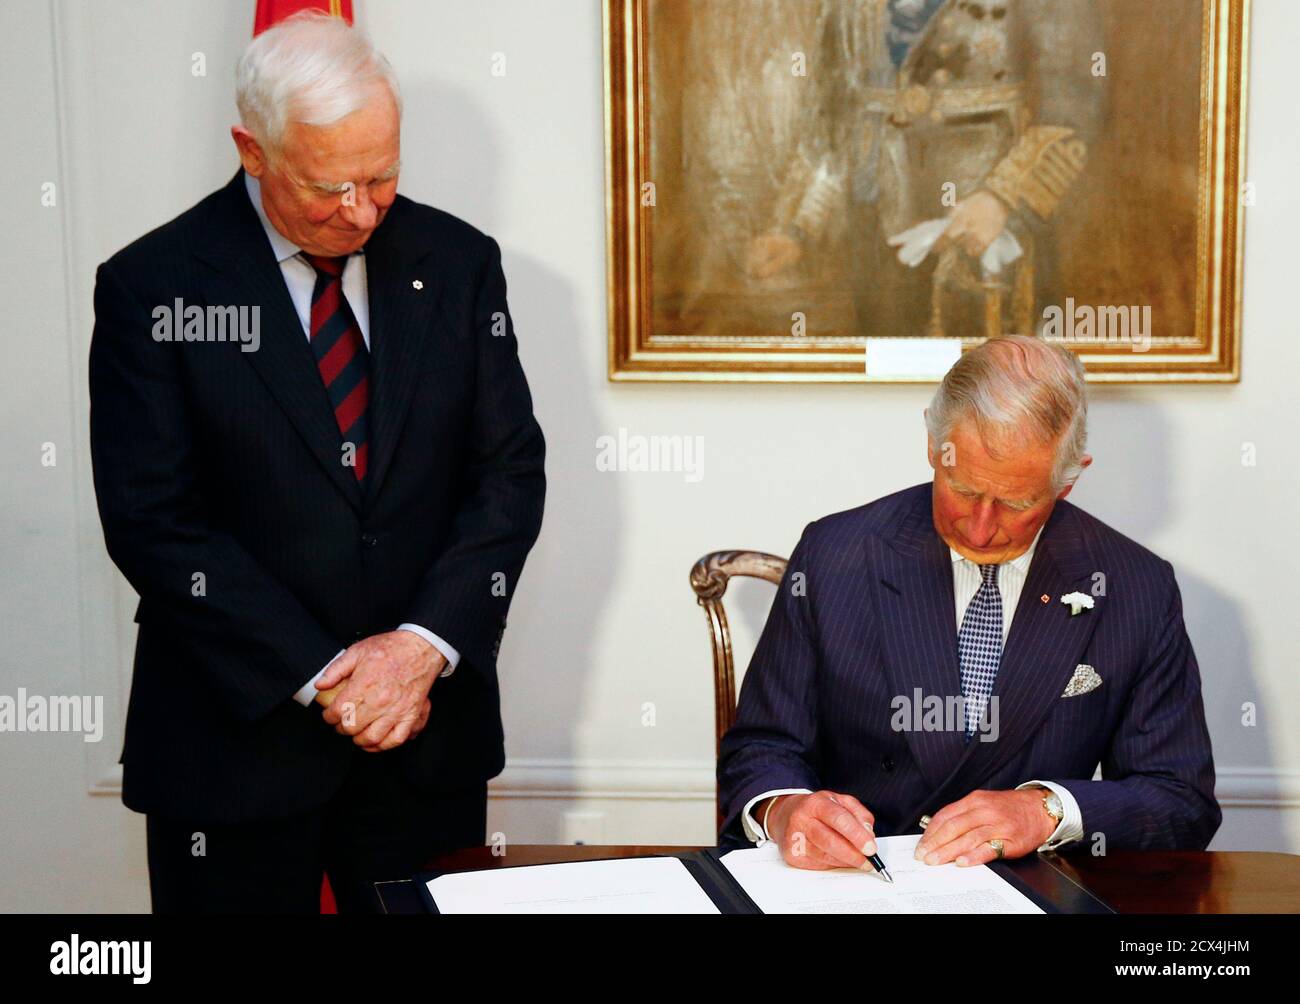 Britain's Prince Charles signs a document to be sworn in as a member of the Canadian Privy Council beside Governor General of Canada David Johnson (L) in Halifax, Nova Scotia May 18, 2014. The royal couple are on a four-day visit to Canada that begins in Halifax and includes stops in Pictou, Nova Scotia, the Prince Edward Island towns of Charlottetown, Bonshaw and Cornwall and concludes in Winnipeg.   REUTERS/Mark Blinch (CANADA - Tags: ROYALS SOCIETY ENTERTAINMENT) Stock Photo